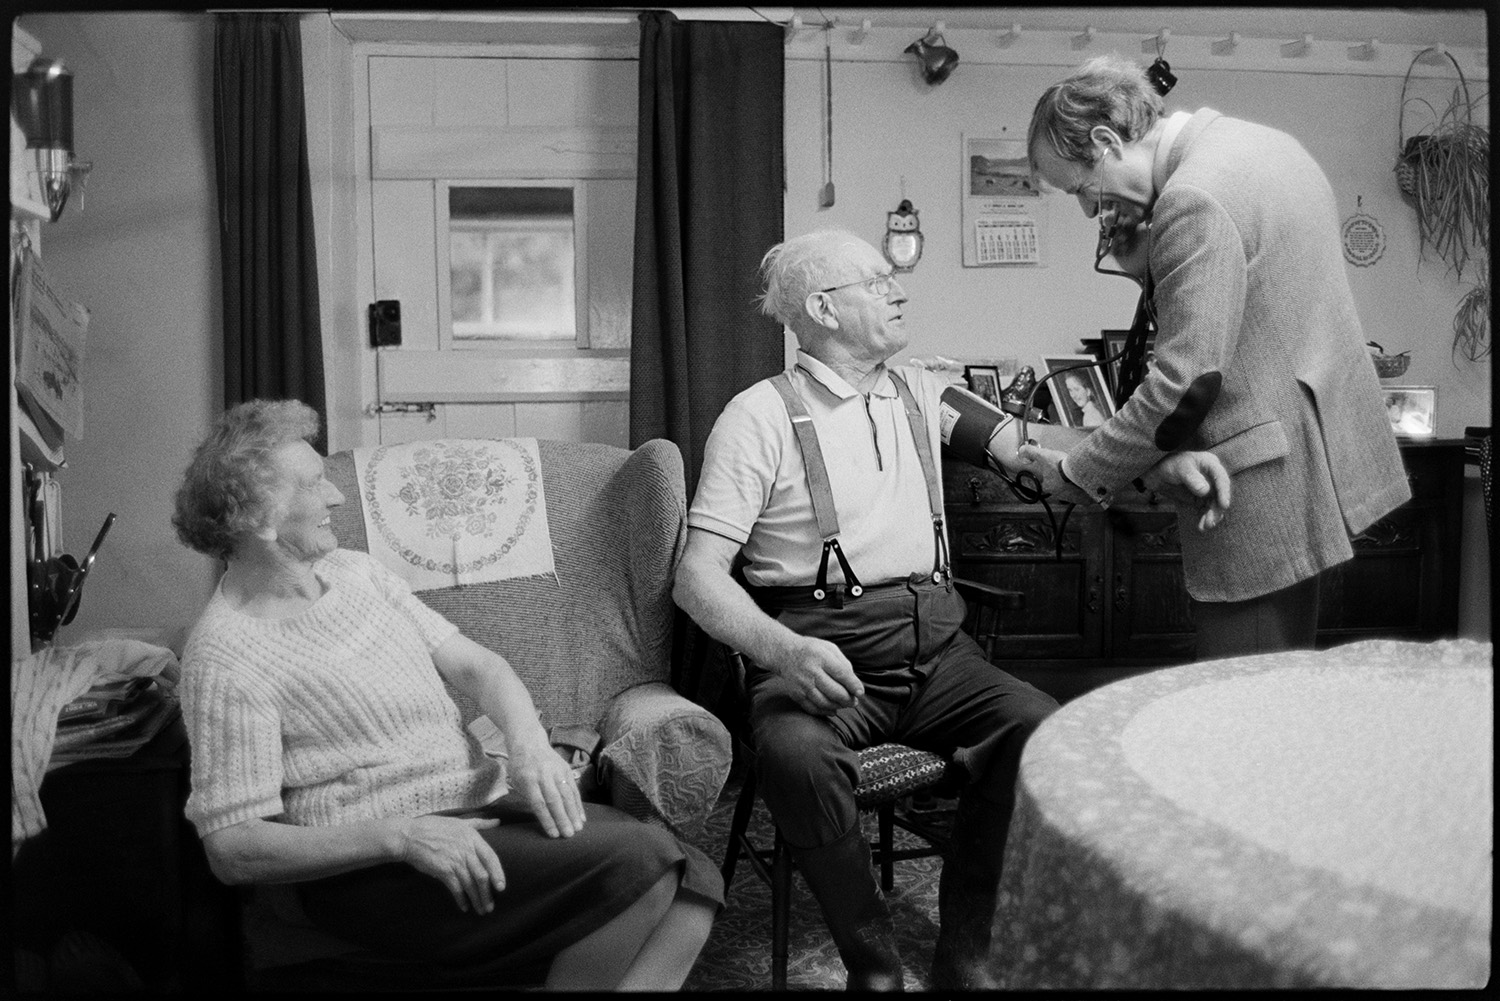 Doctor on his rounds examining men and women patients in their homes.
[Doctor Richard Westcott taking the blood pressure of a man in his house in South Molton. They are in the living room and his wife is sat next to him in an armchair. A table, chairs and sideboard with photographs can be seen in the background, with a wooden door behind a curtain.]